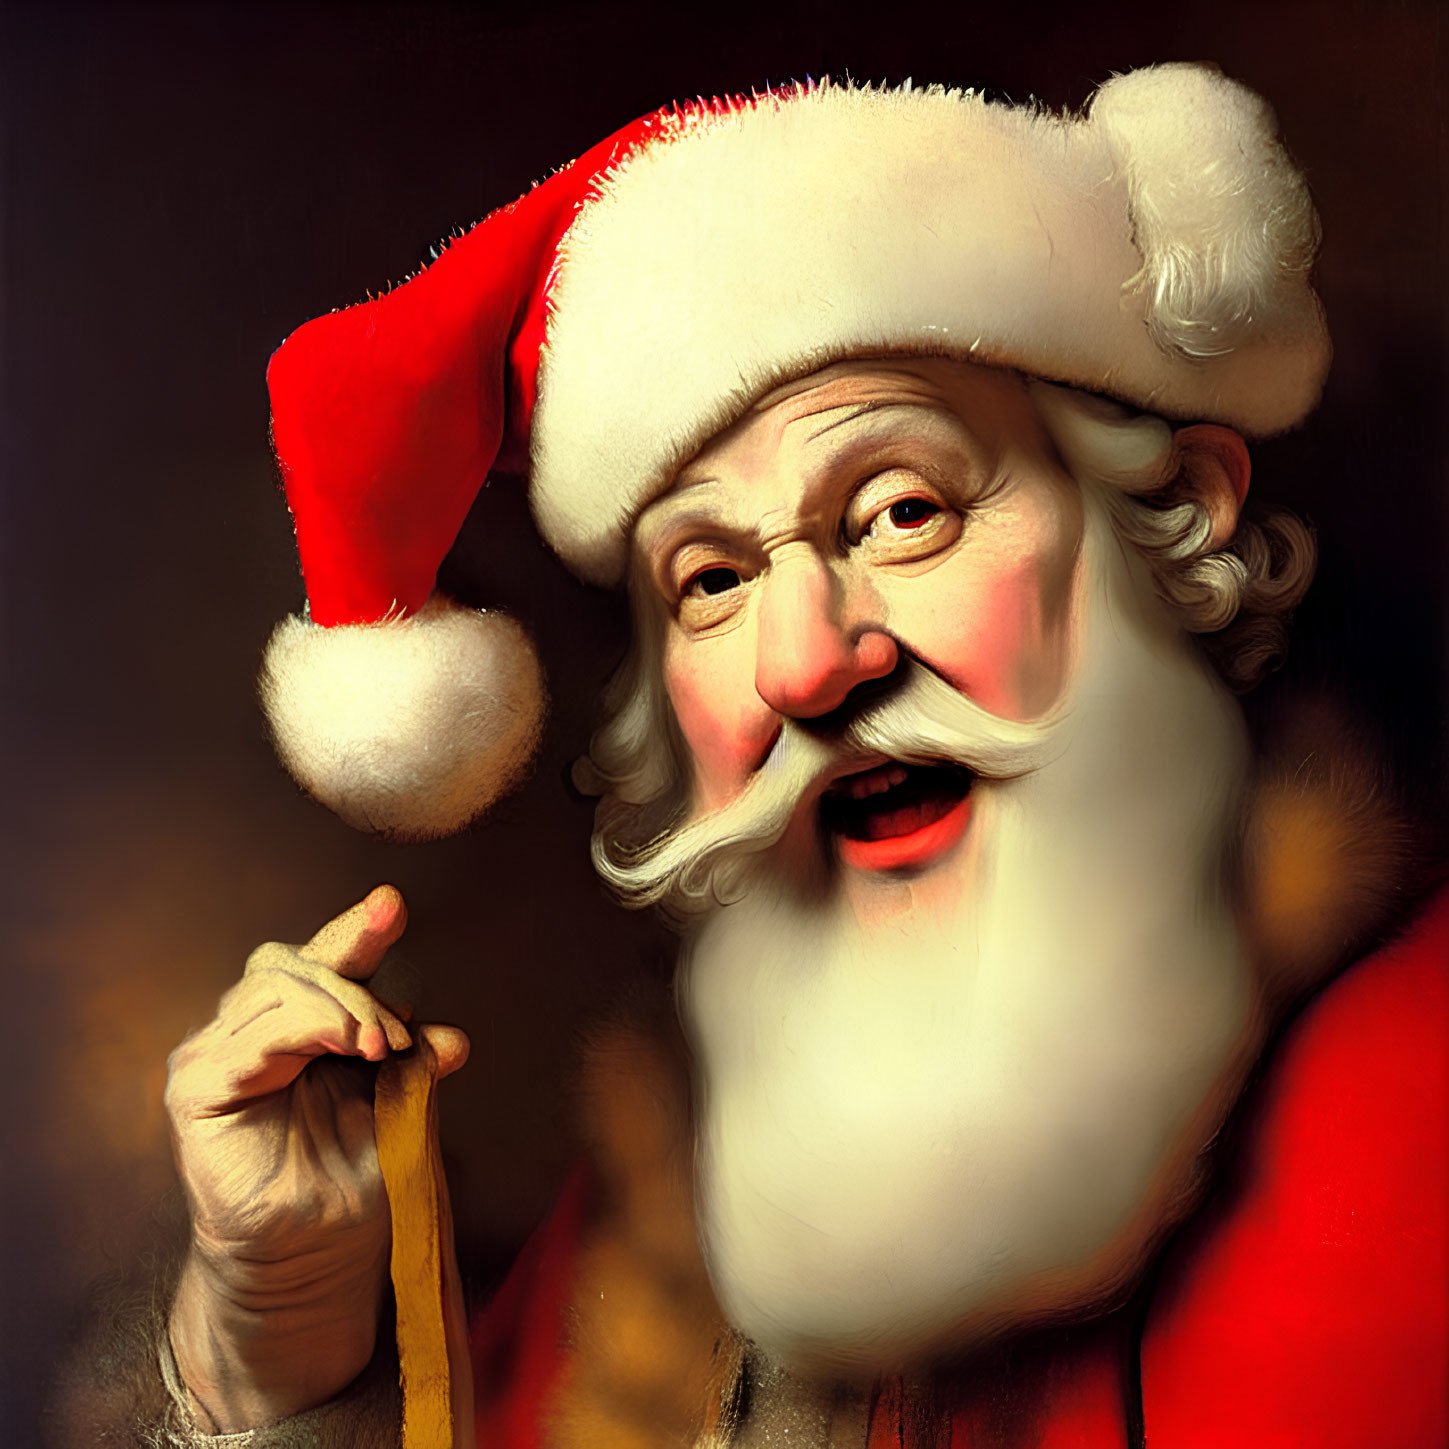 Bearded character in Santa hat holding spectacle frame